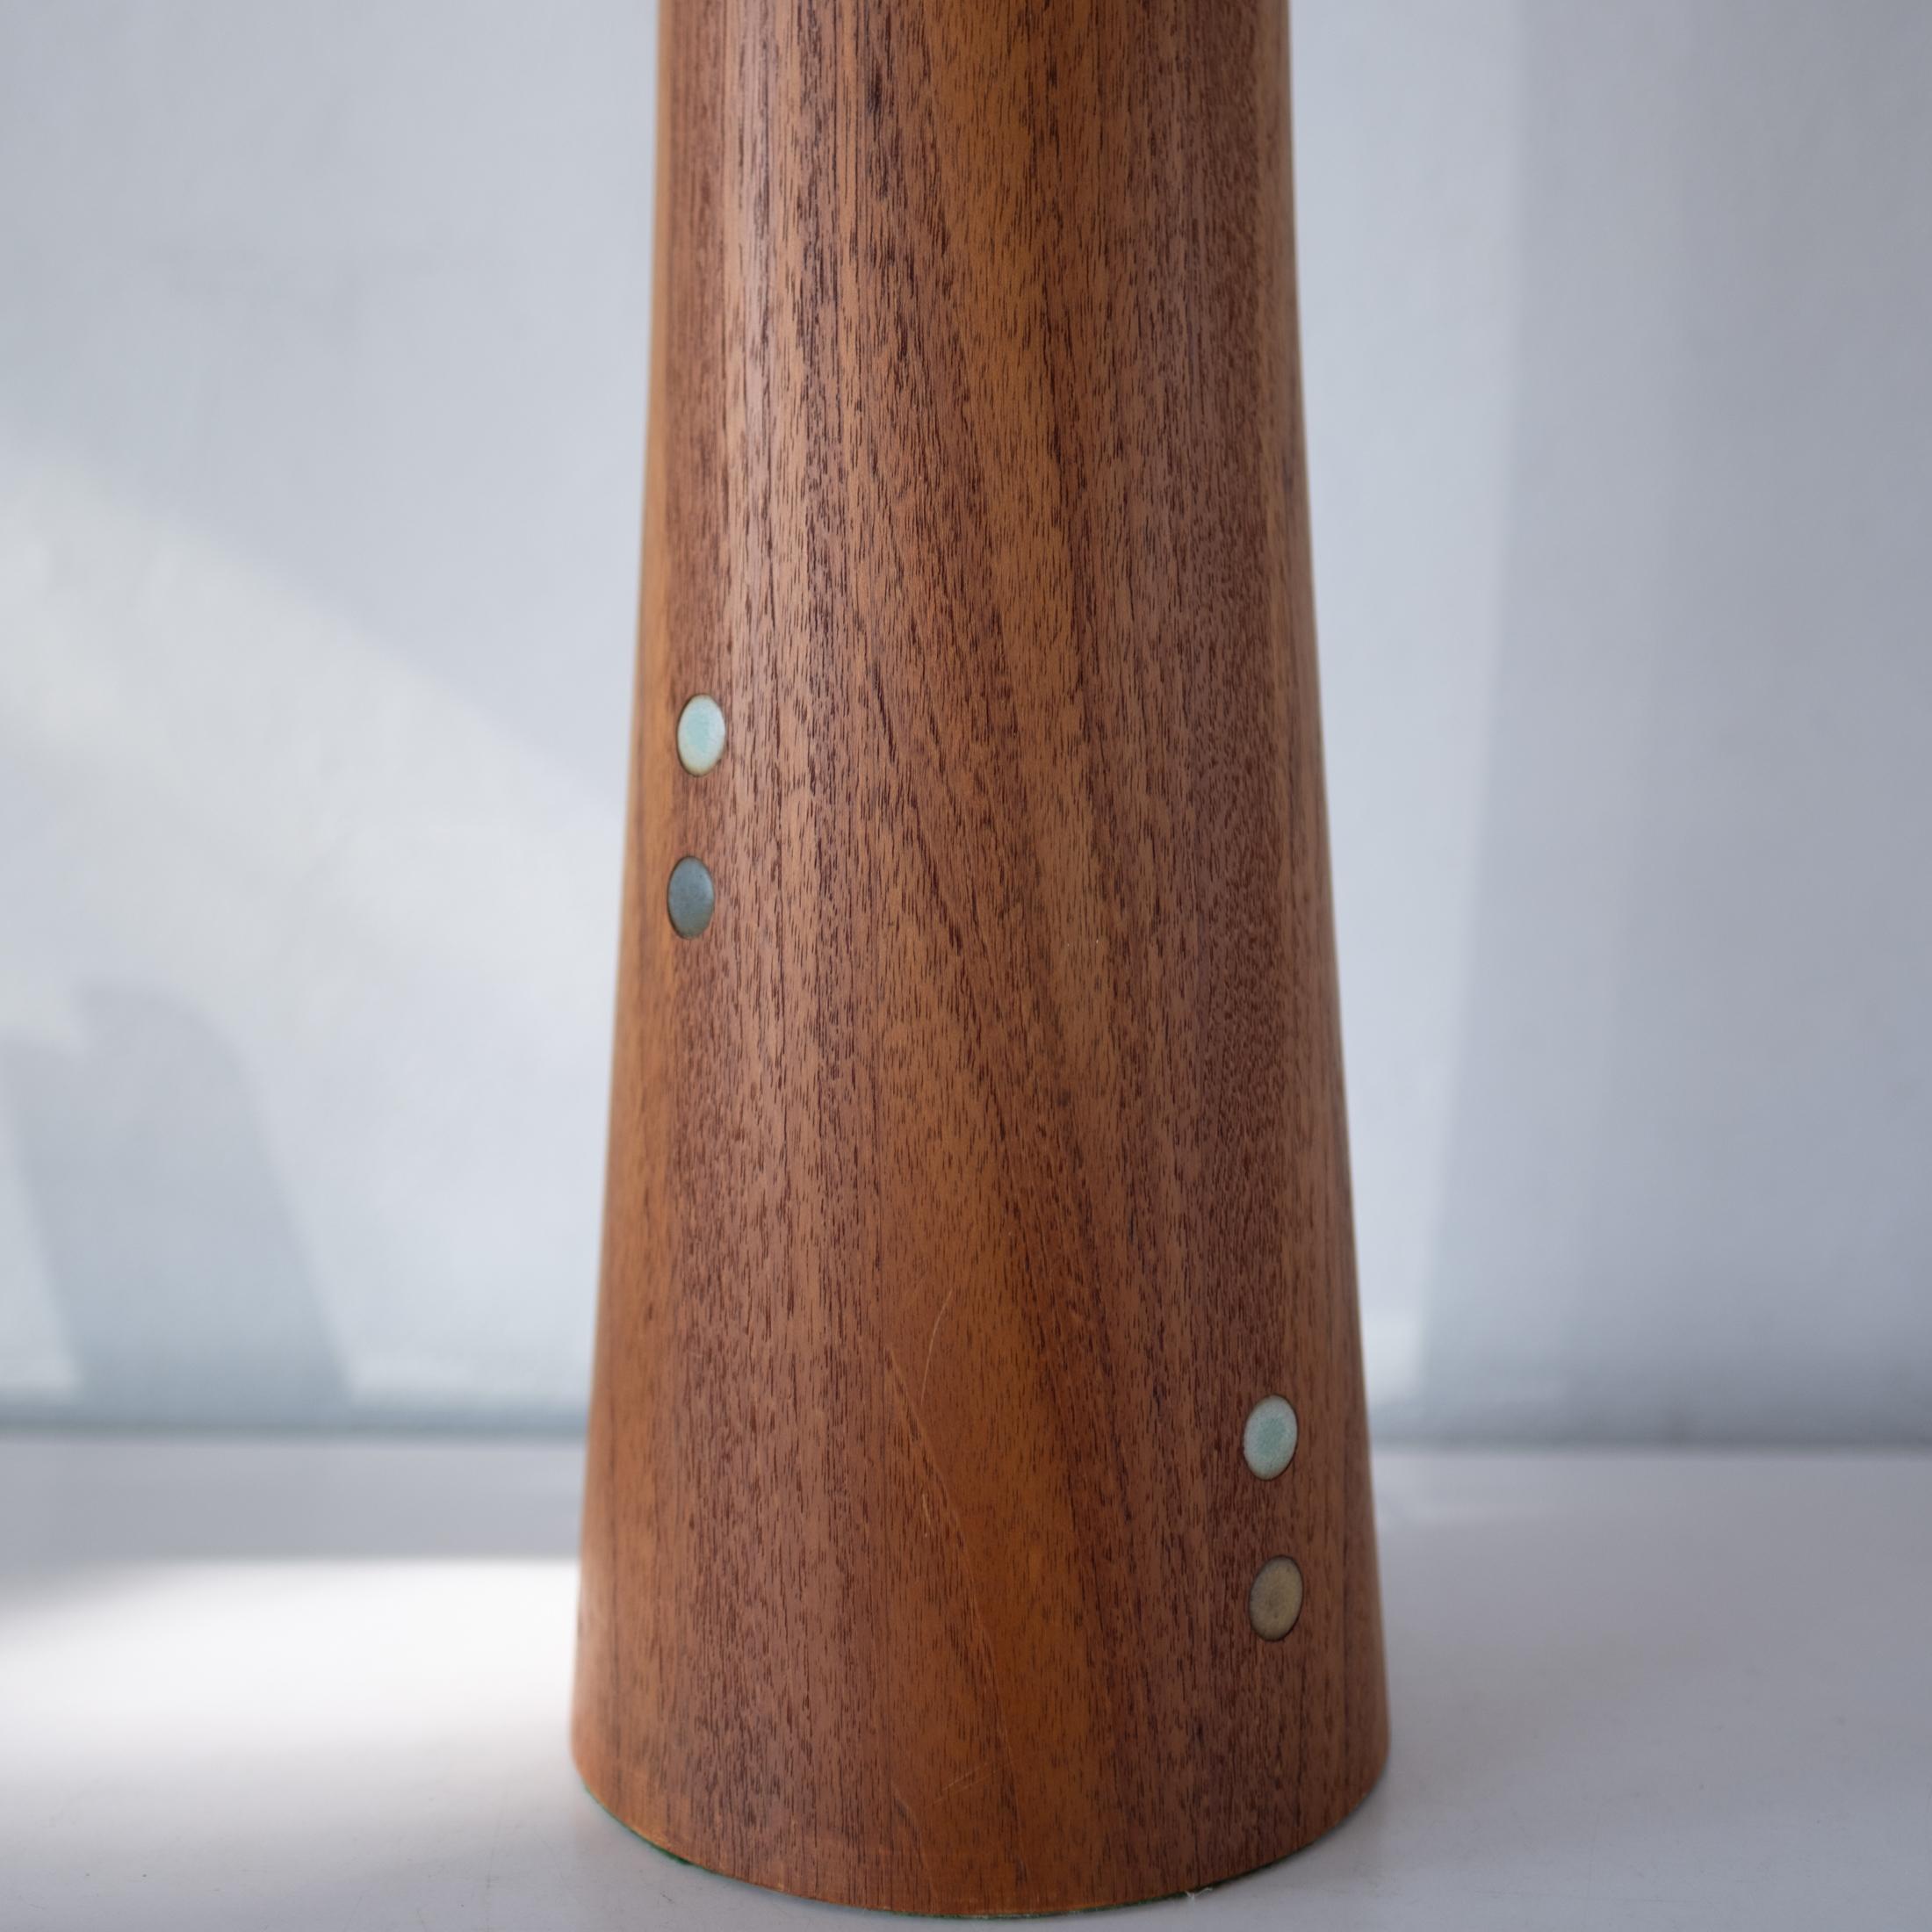 Jane and Gordon Martz Ceramic and Walnut Table Lamp In Good Condition For Sale In San Diego, CA